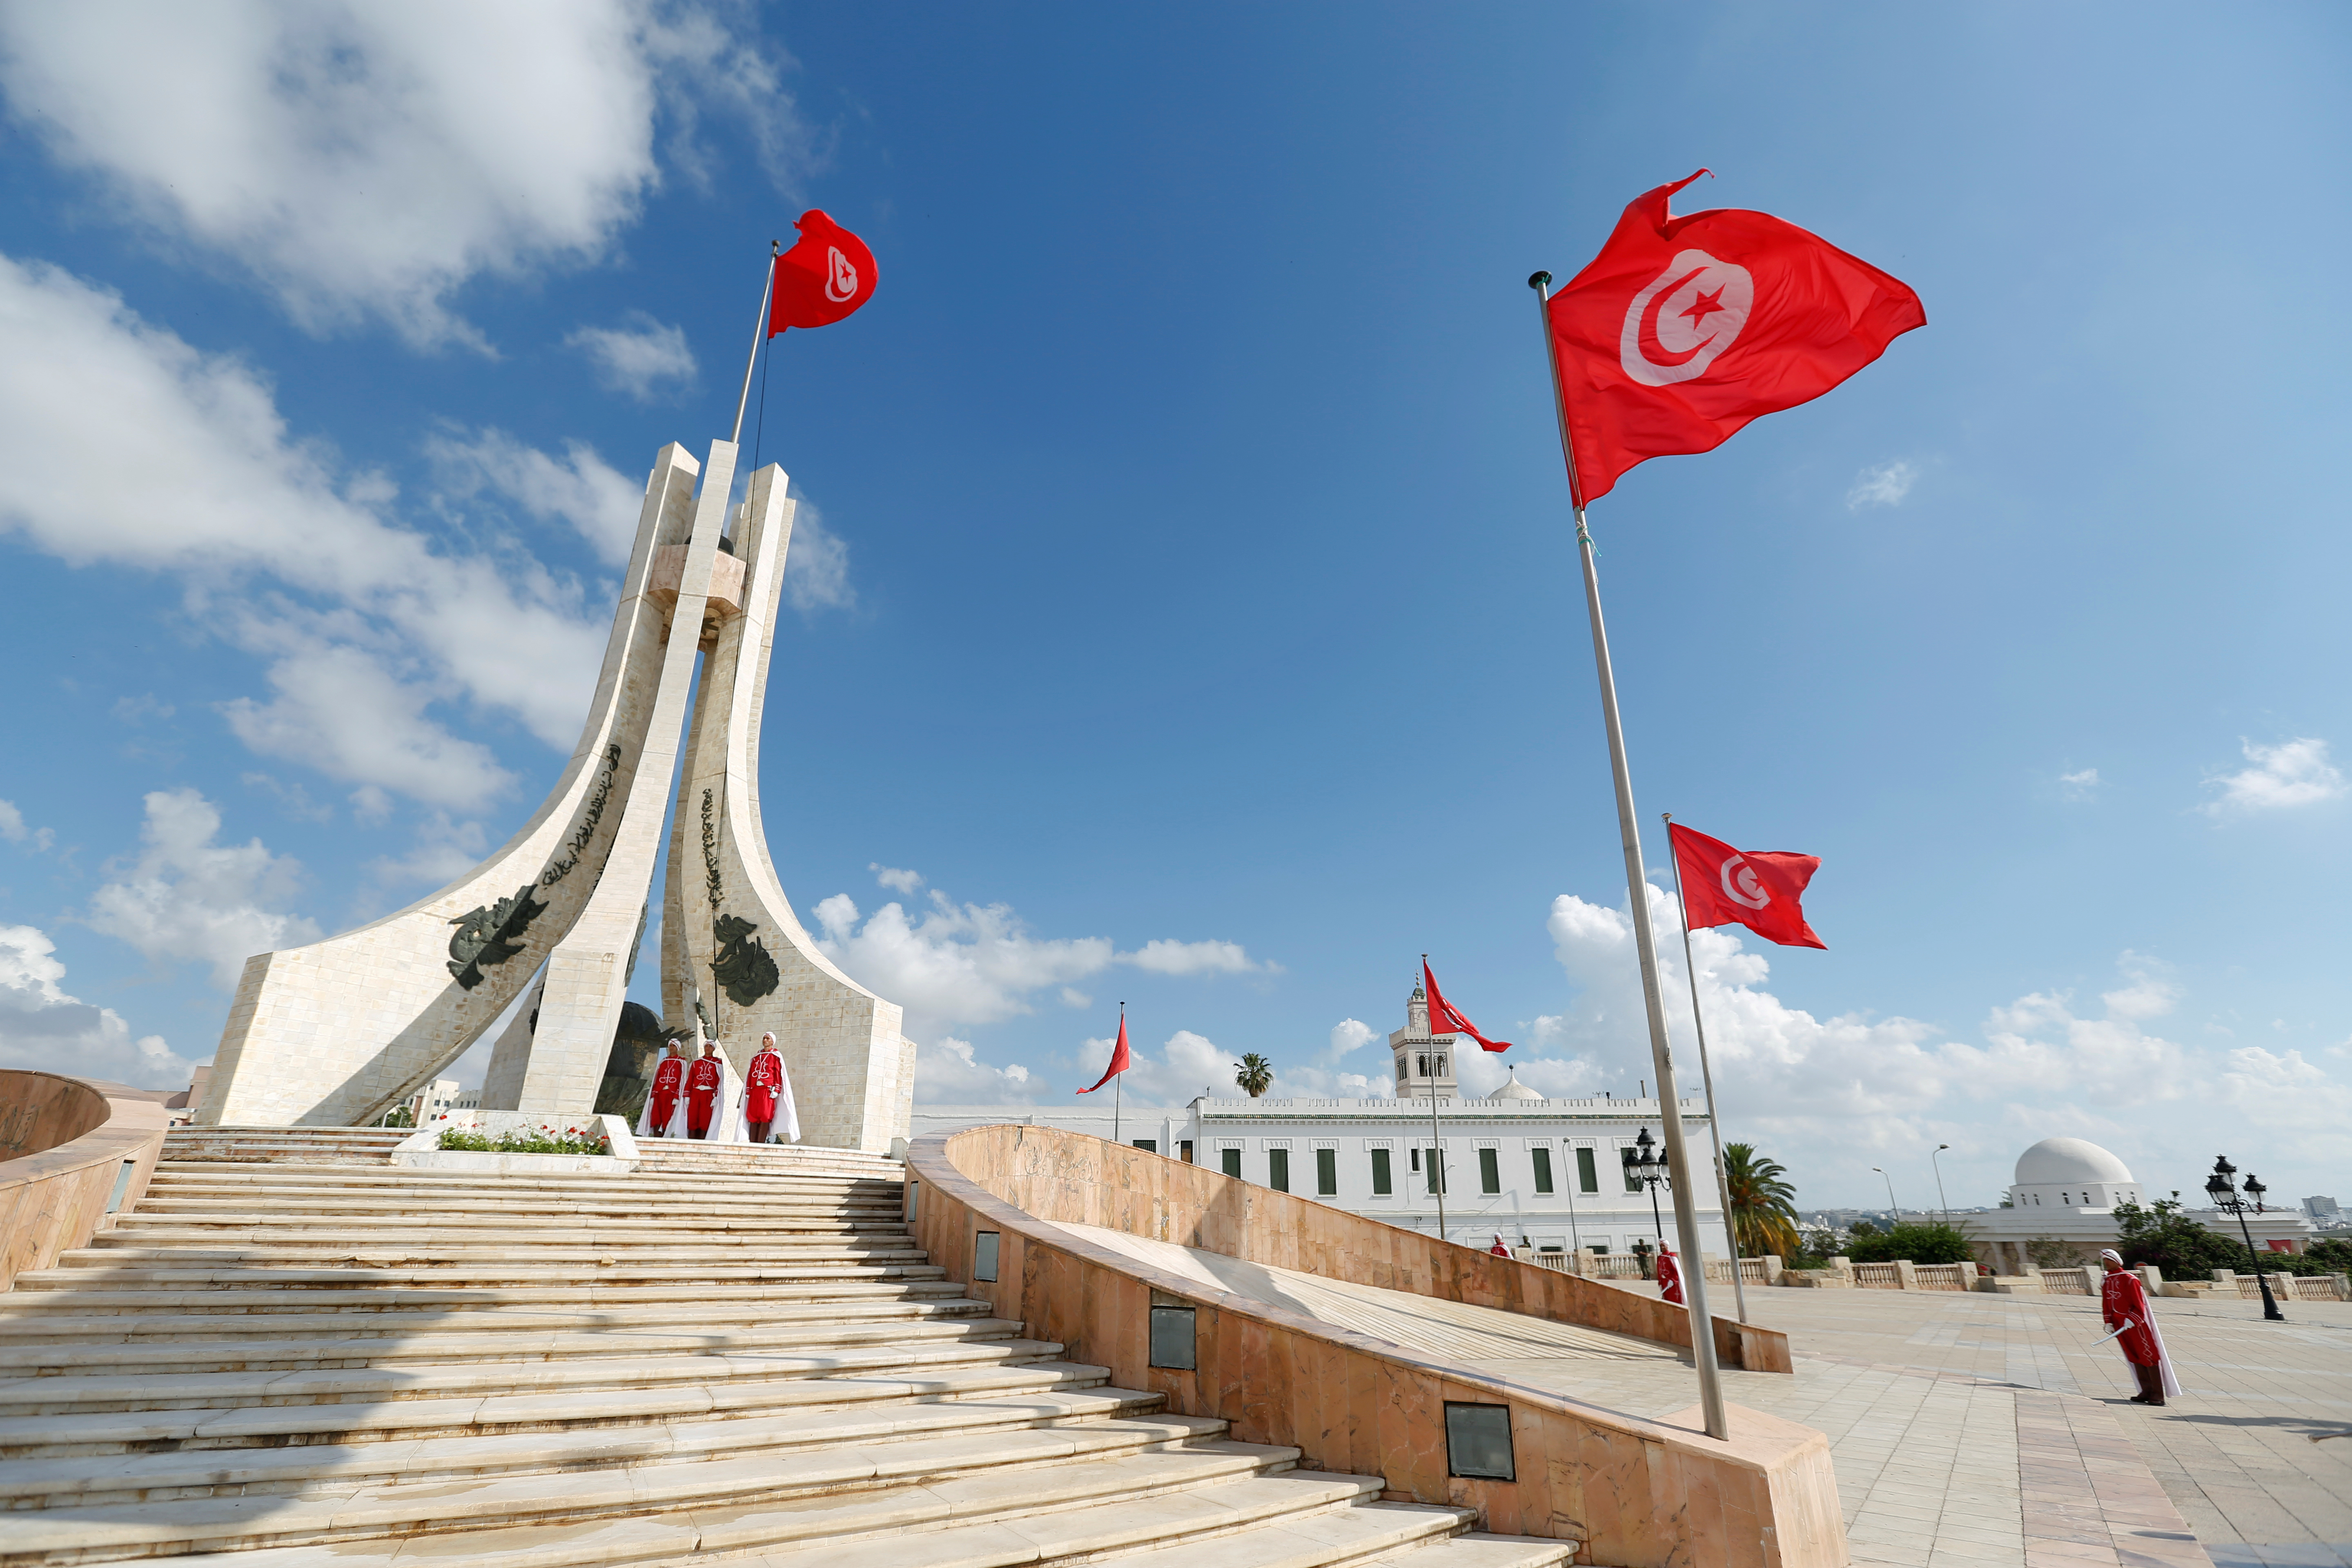 Members of the honour guard stand at attention during a flag raising in place of Kasba in Tunis